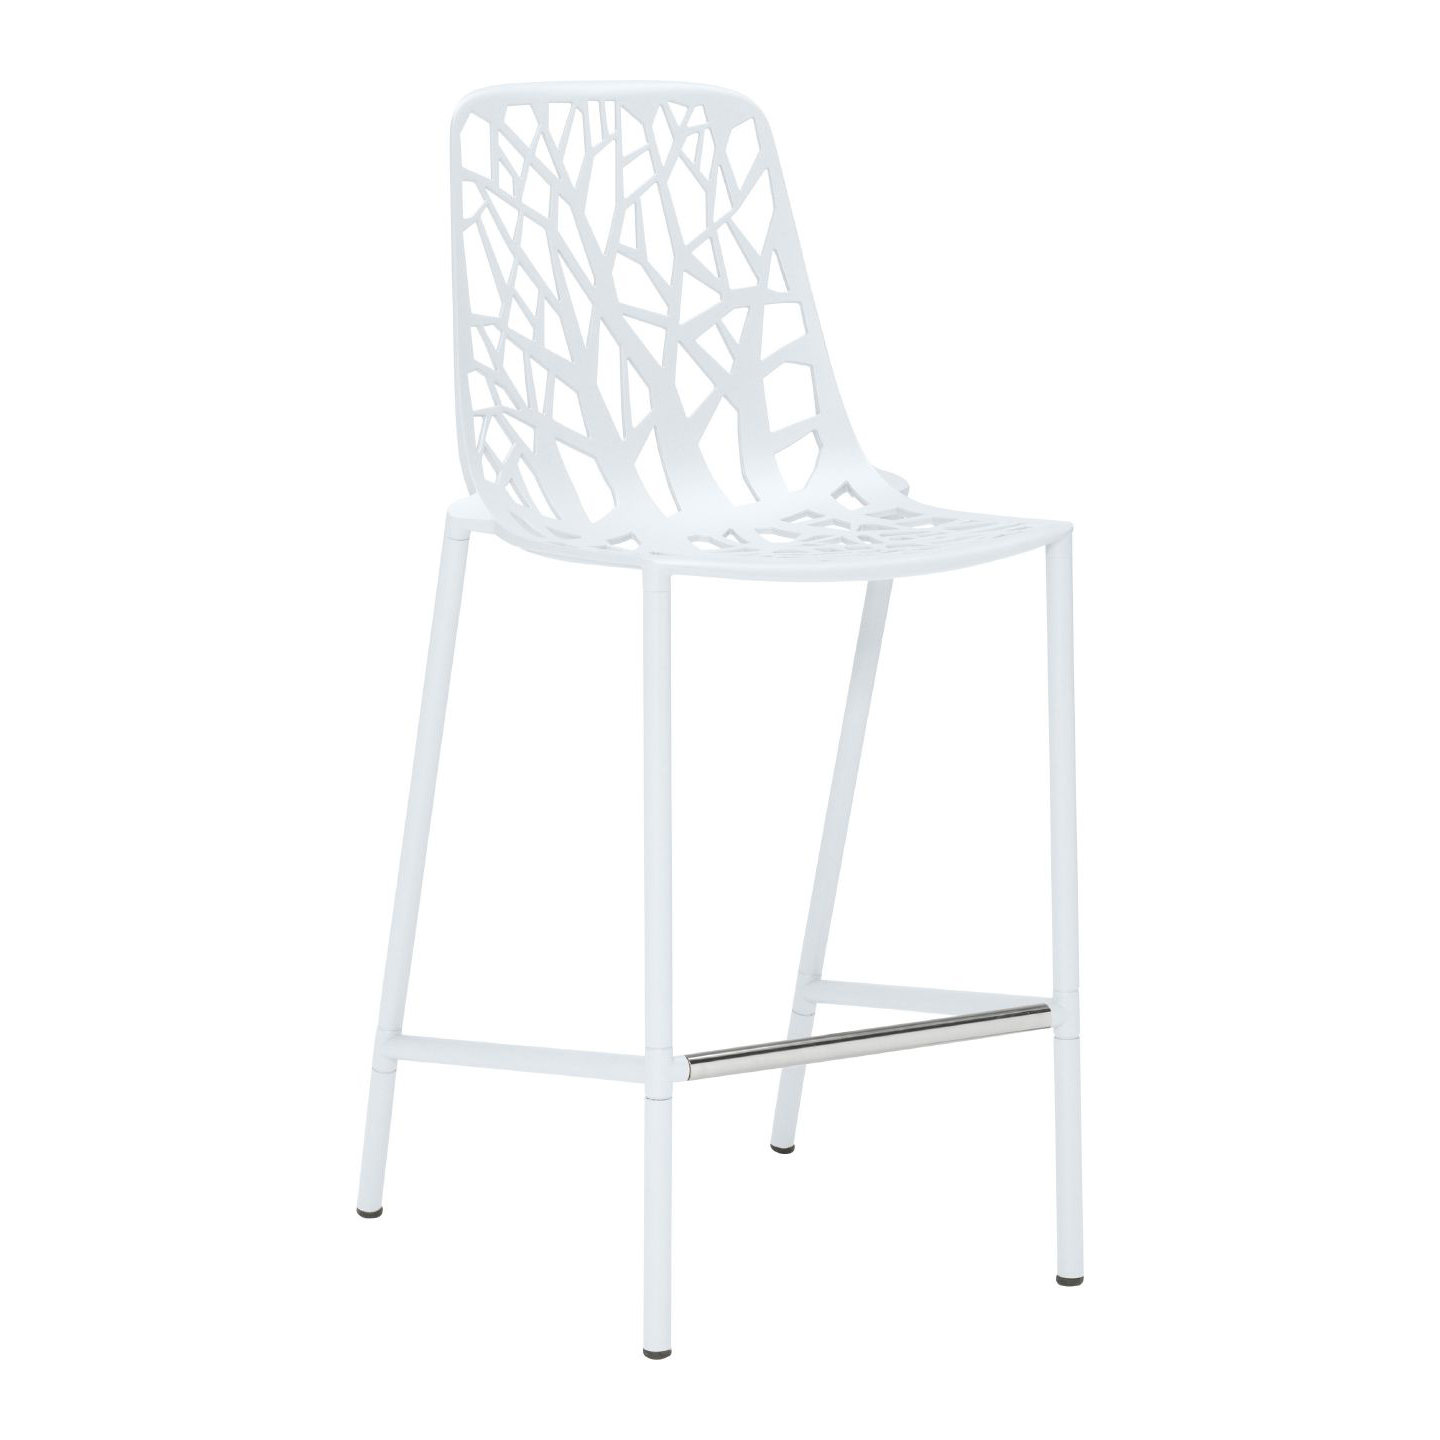 Haworth Forest chair in white in a side view